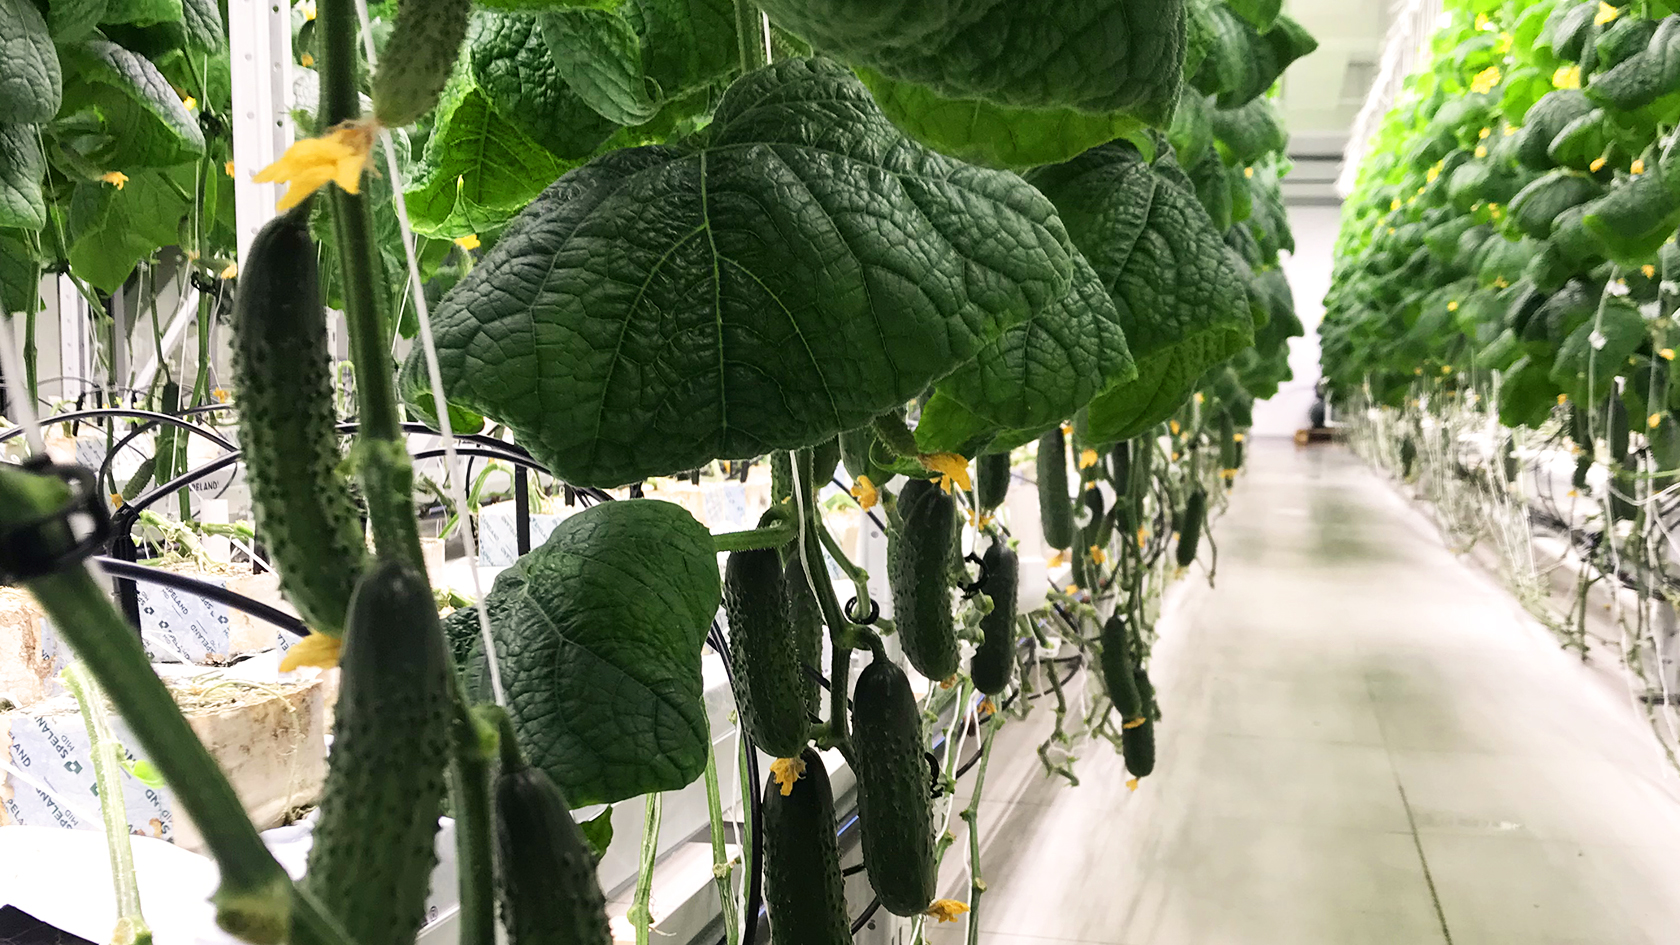 Hydroponic System to Grow Cucumbers with iFarm Technology